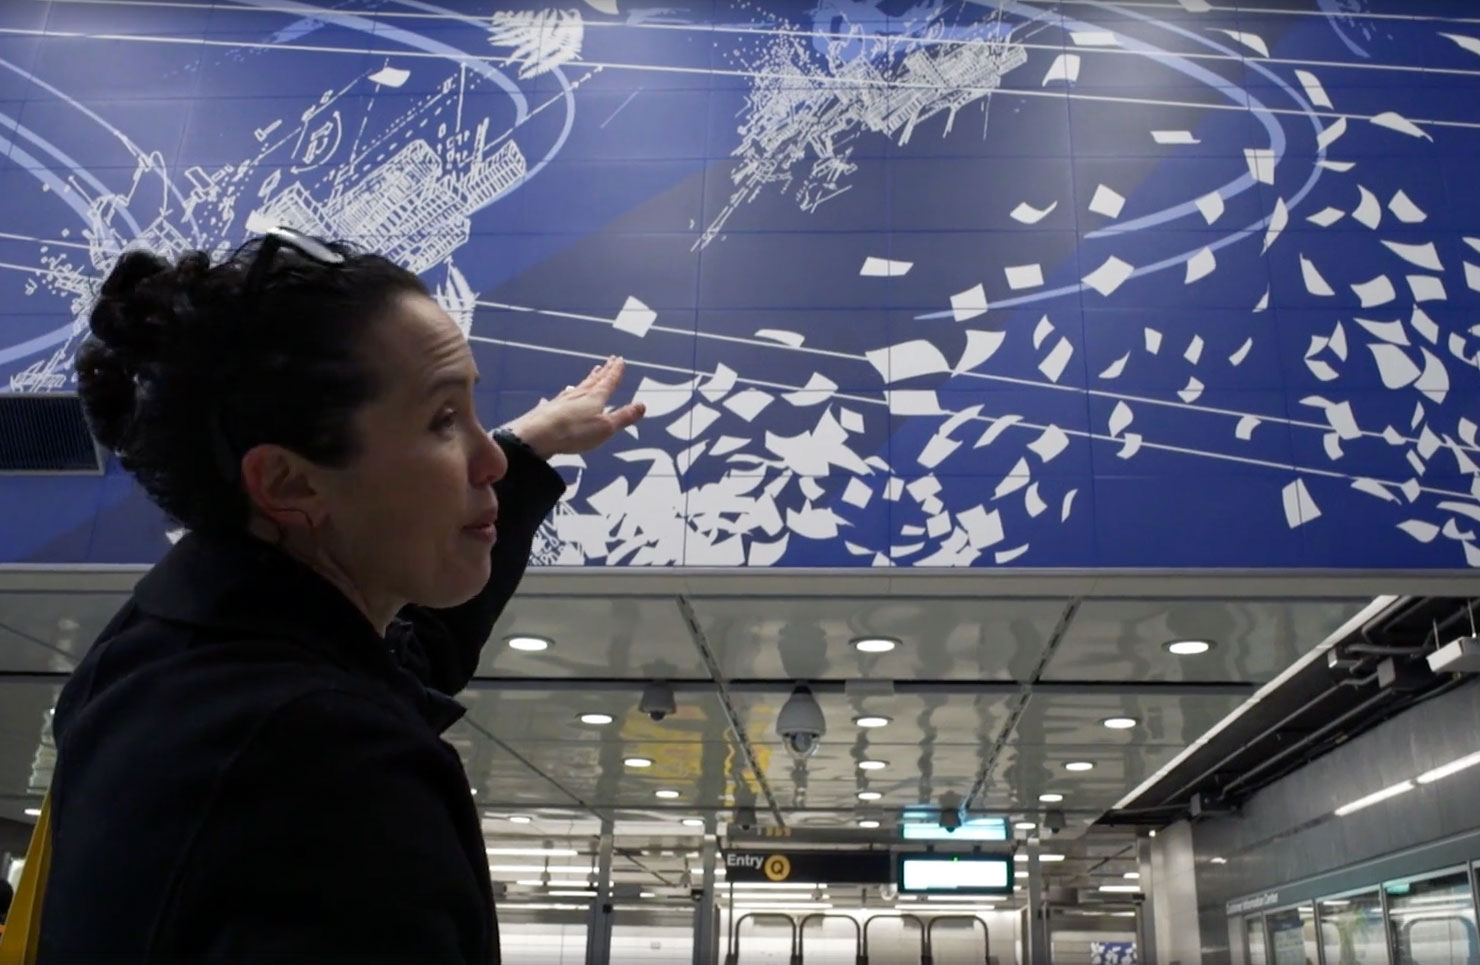 Sarah Sze at the 96th Street St 2nd Avenue Station